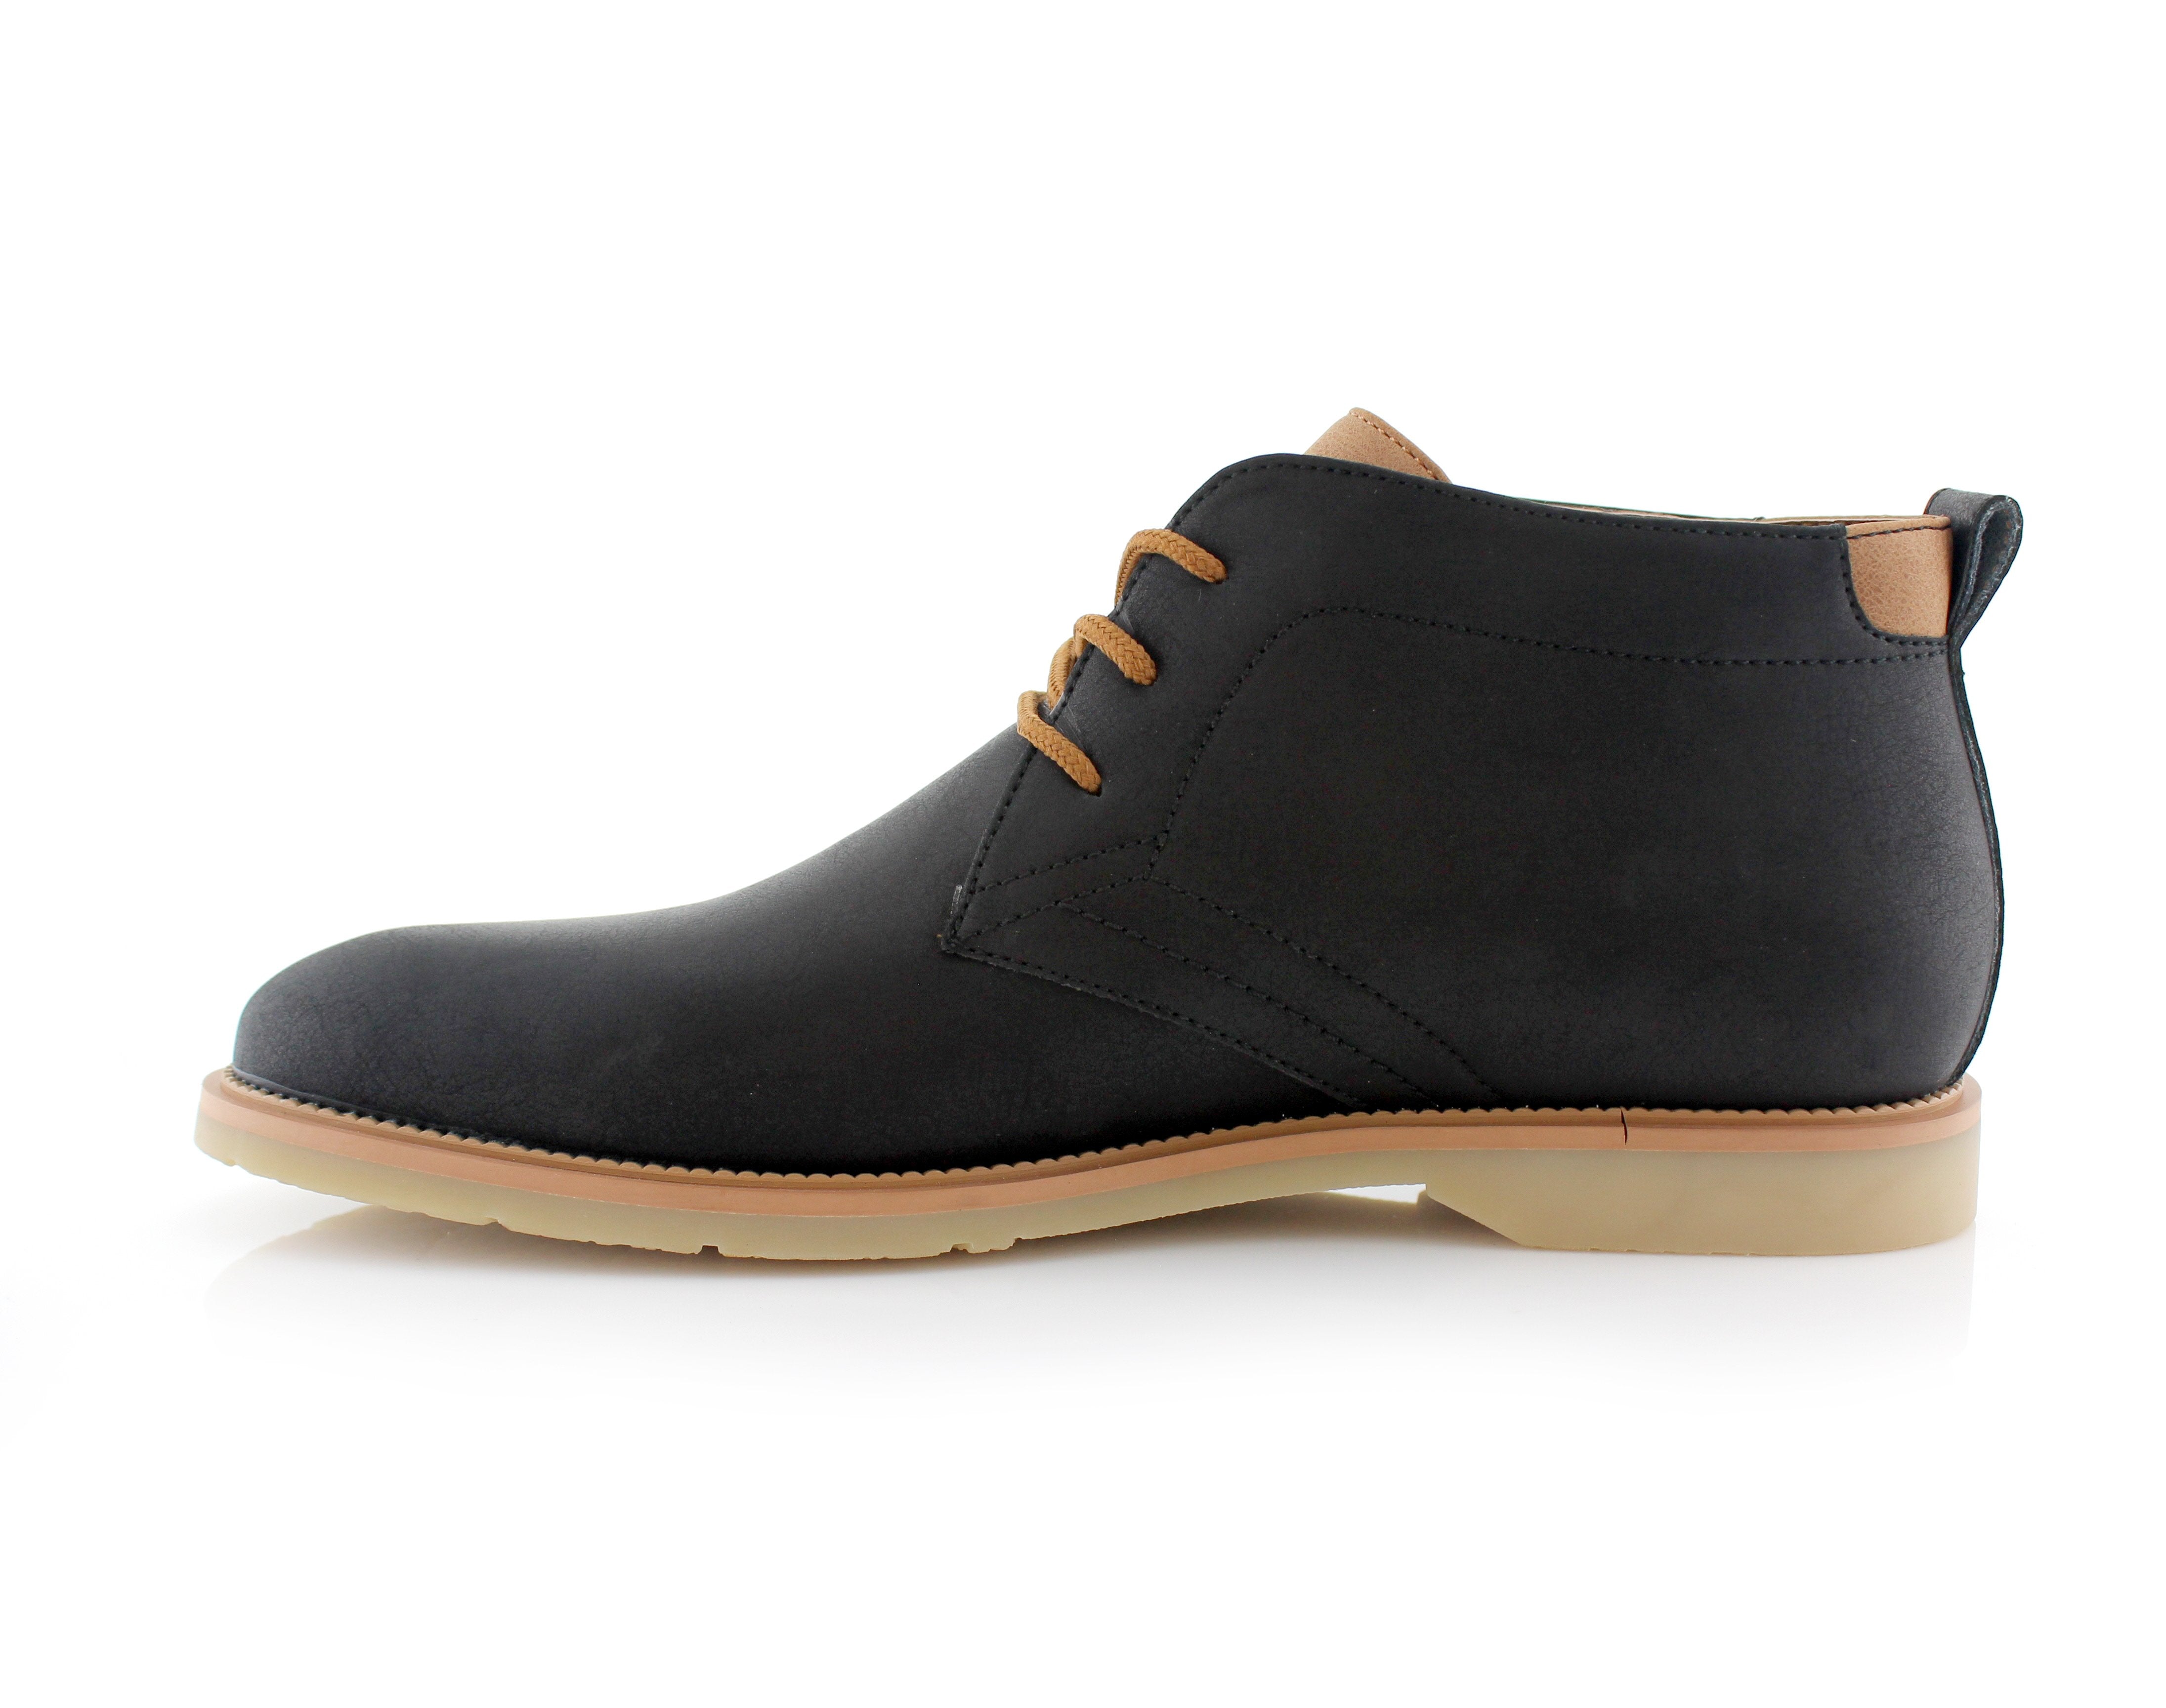 Two-Toned Chukka Boots | Marvin by Ferro Aldo | Conal Footwear | Inner Side Angle View